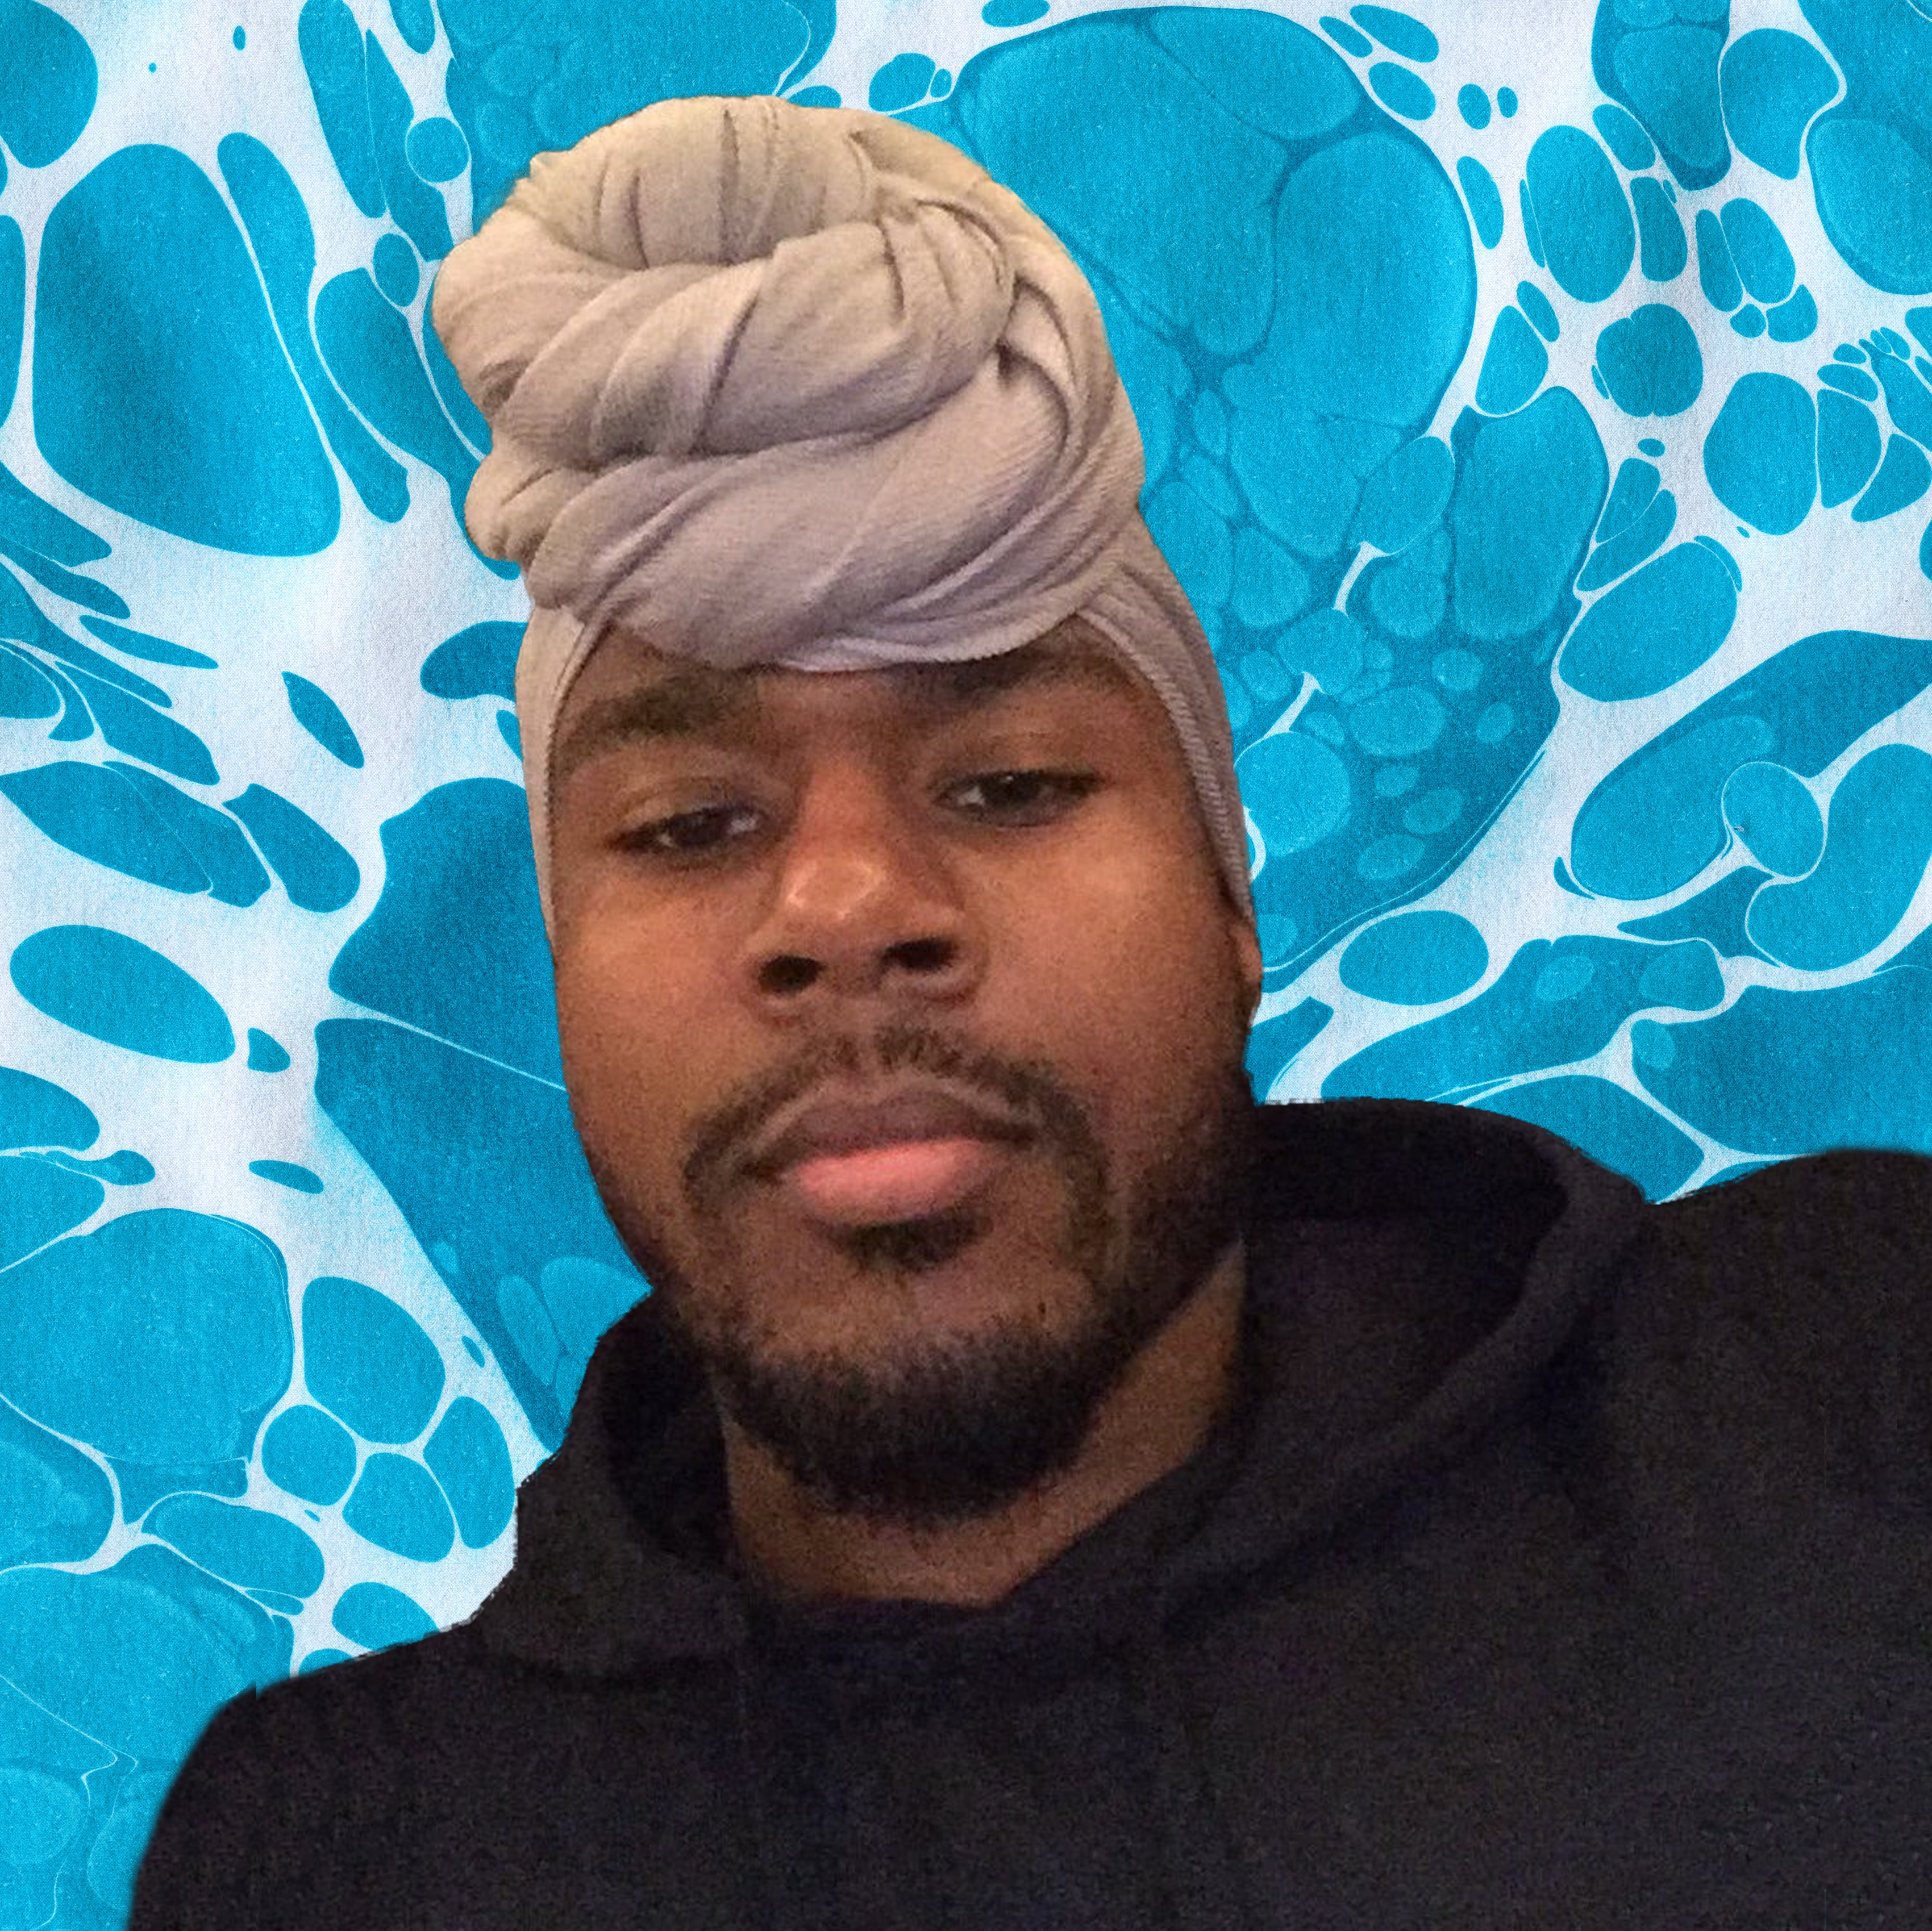 The 'Fellas In Headwraps' Twitter Movement Cannot Be Ignored
